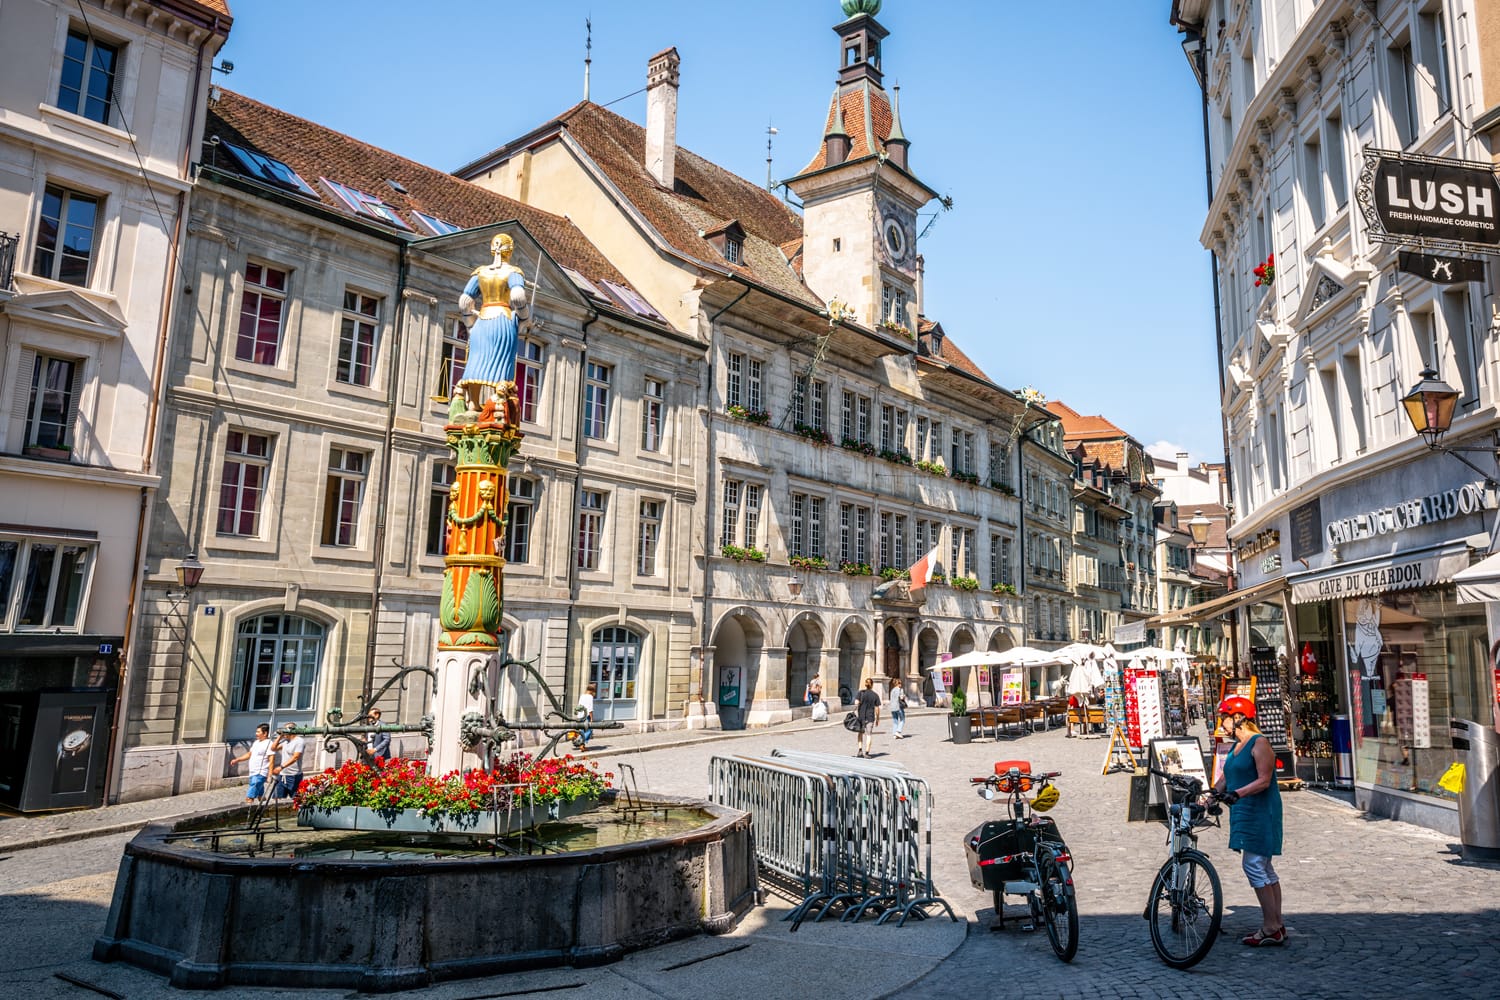 Place de la Palud or Palud square with the iconic Justice fountain and the Lausanne city hall in Lausanne Switzerland